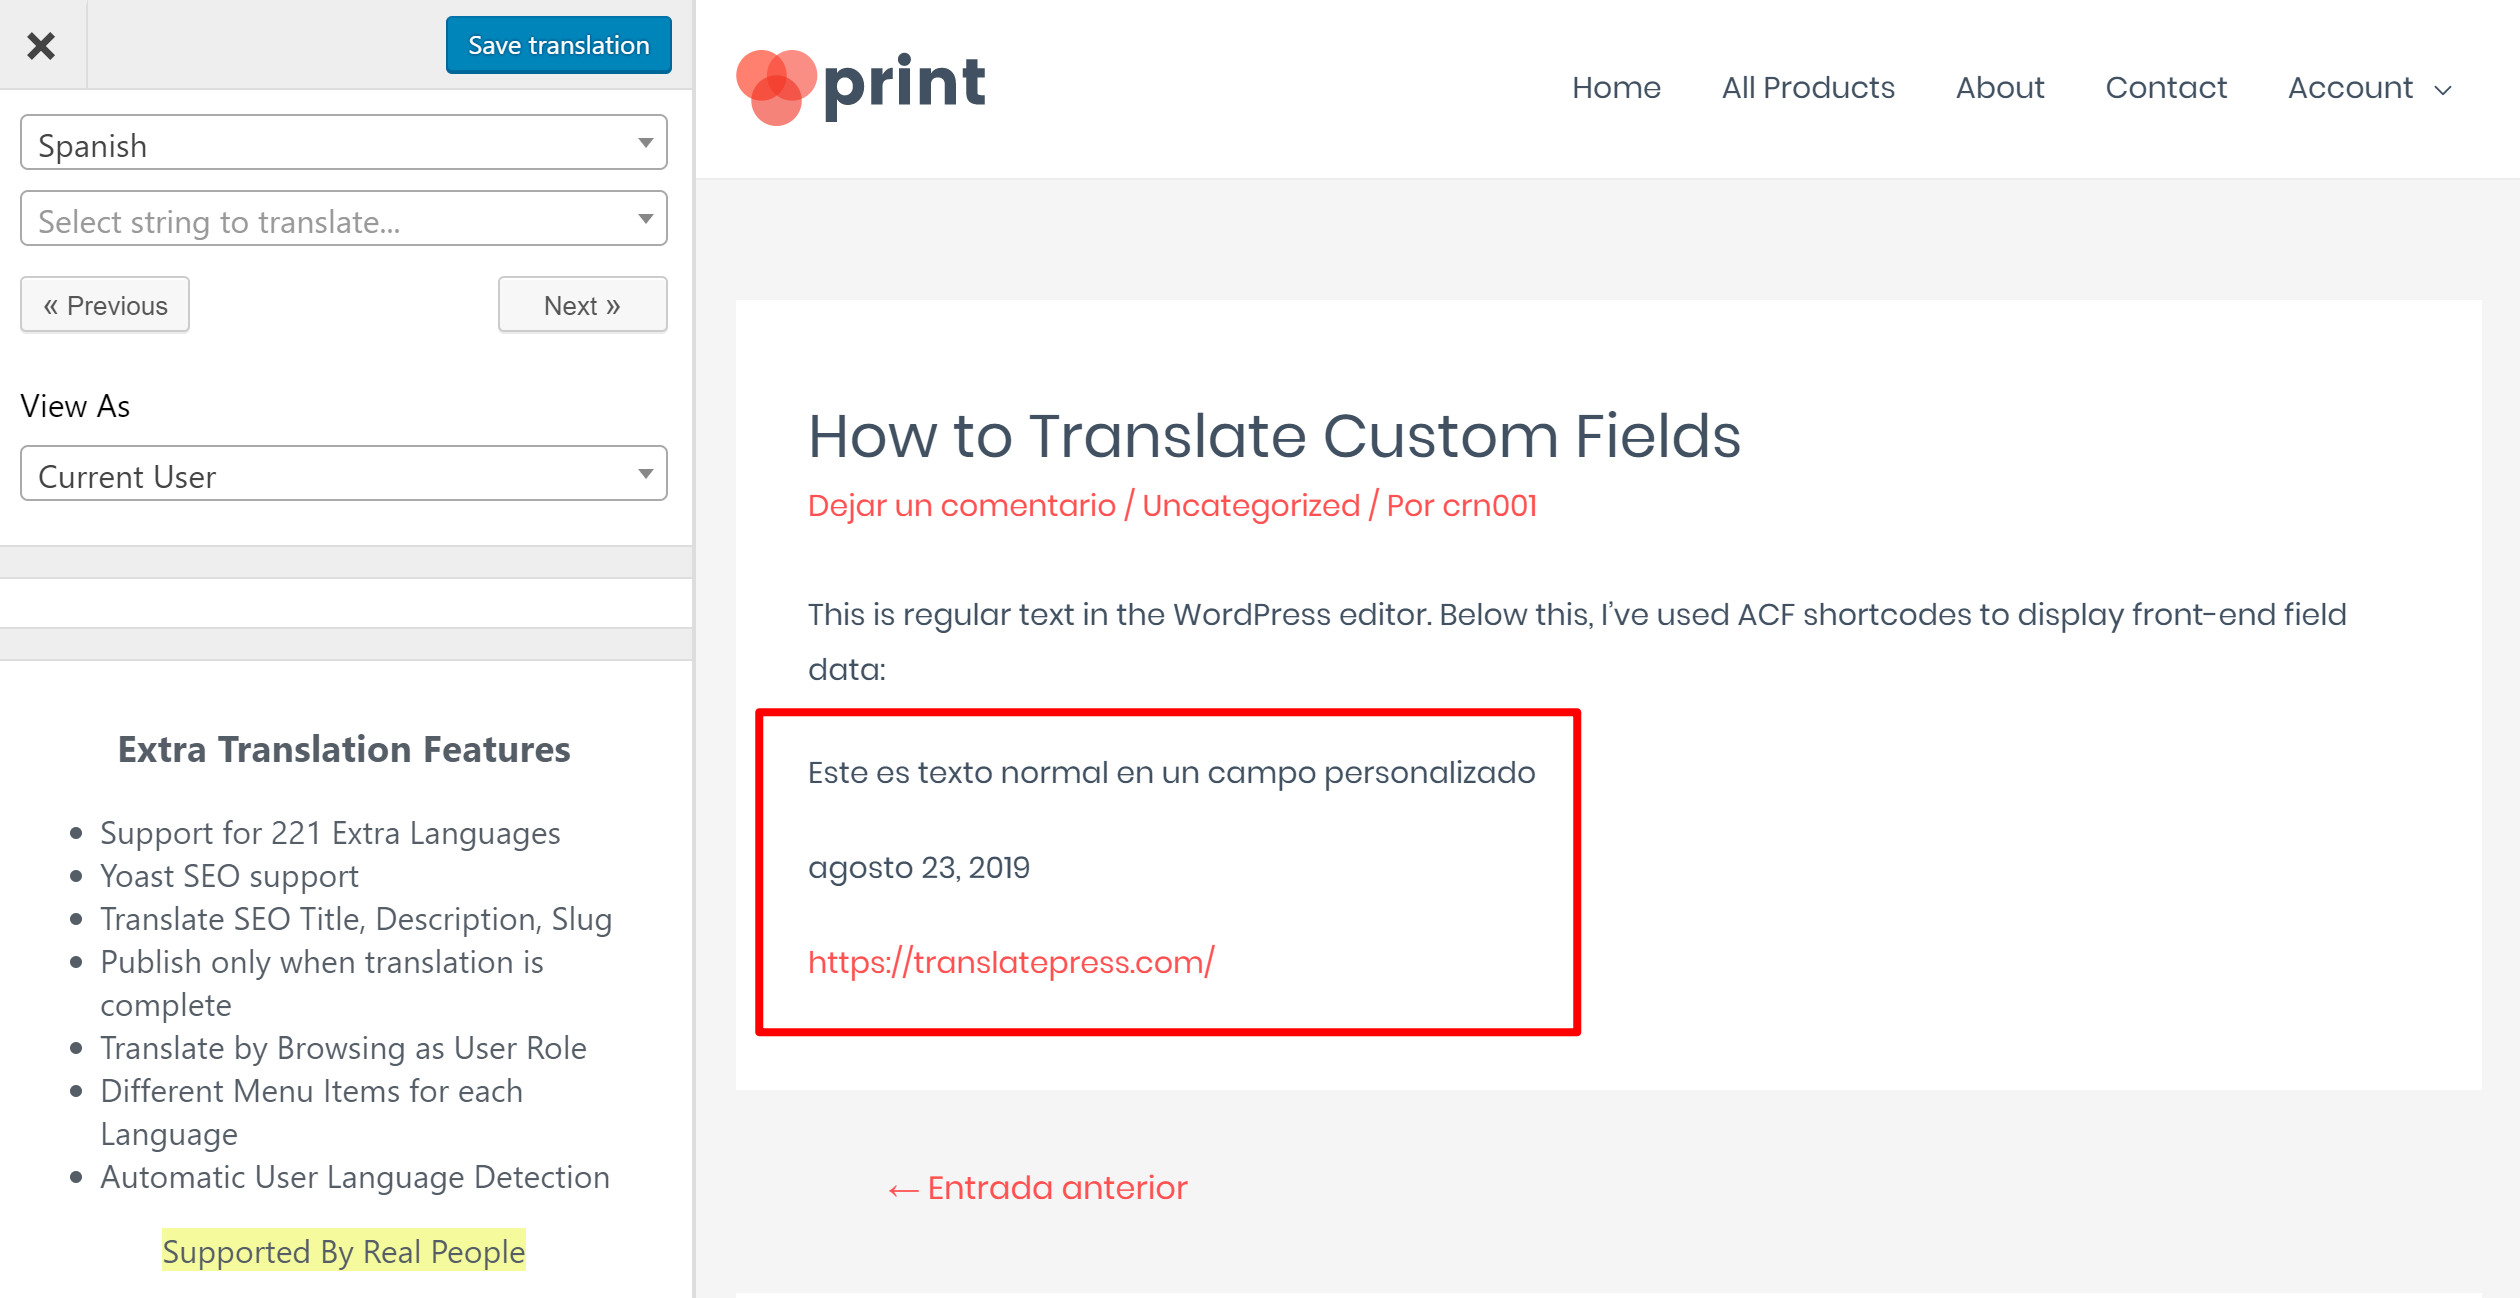 Example of translated custom fields from ACF